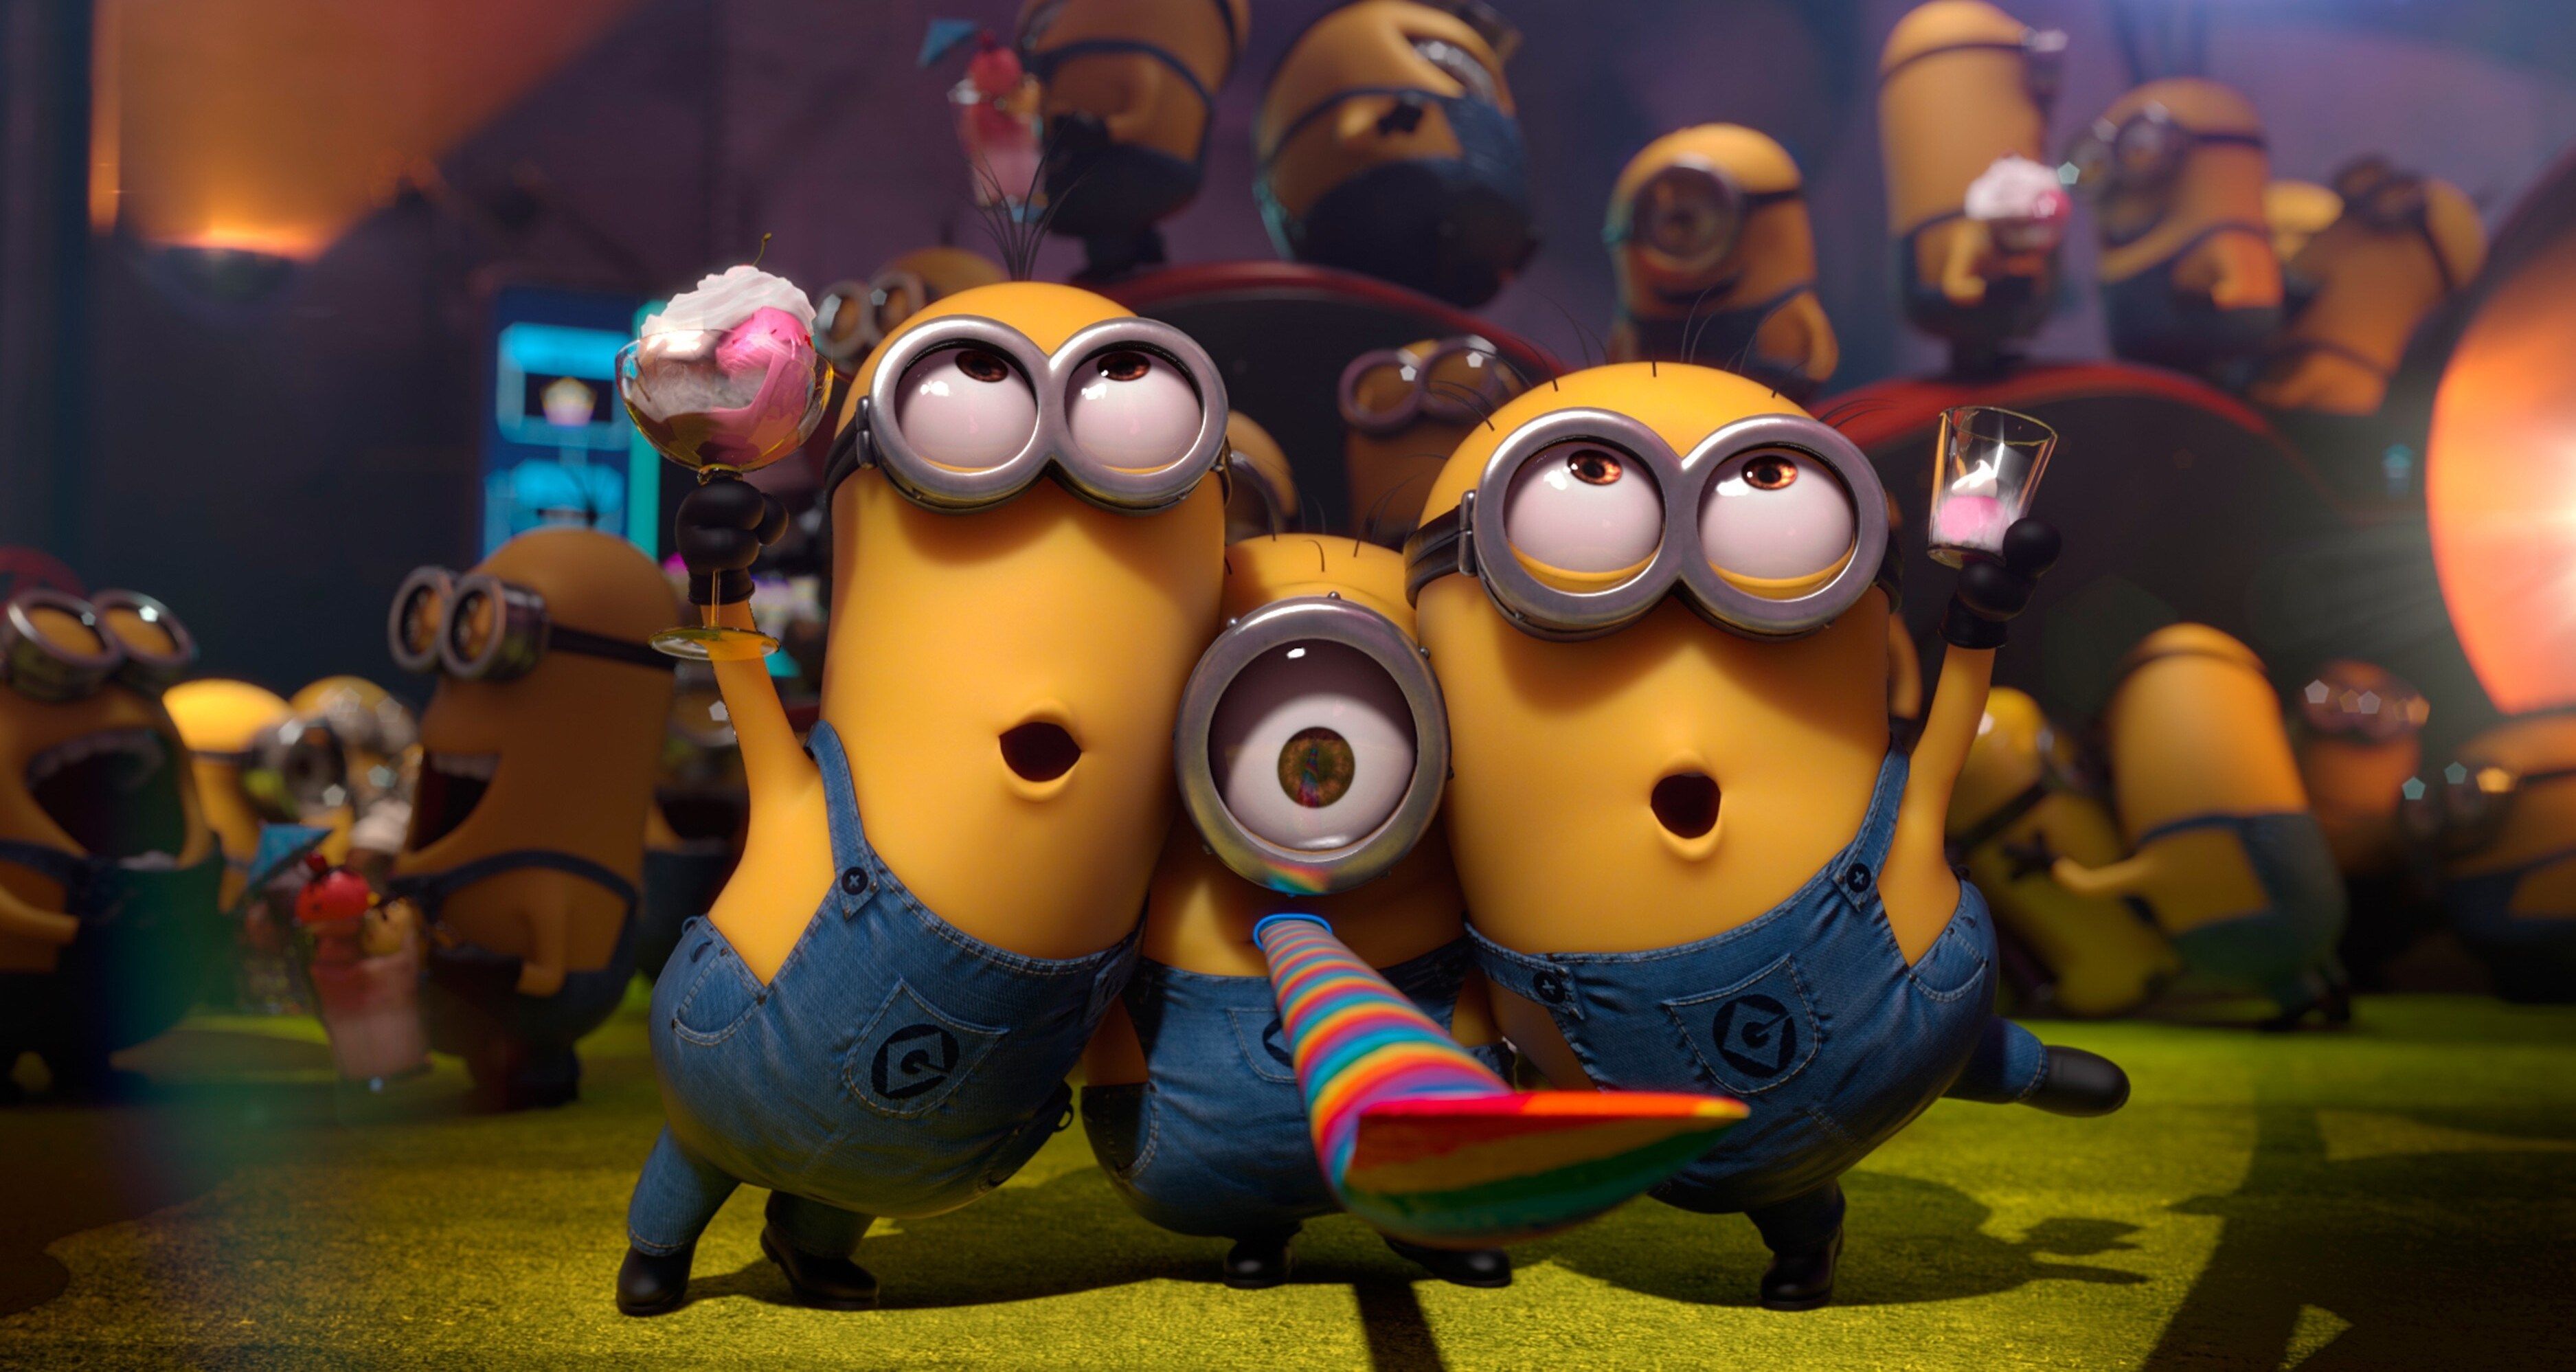 minions 4k HD image for wallpaper HD wallpaper, Background